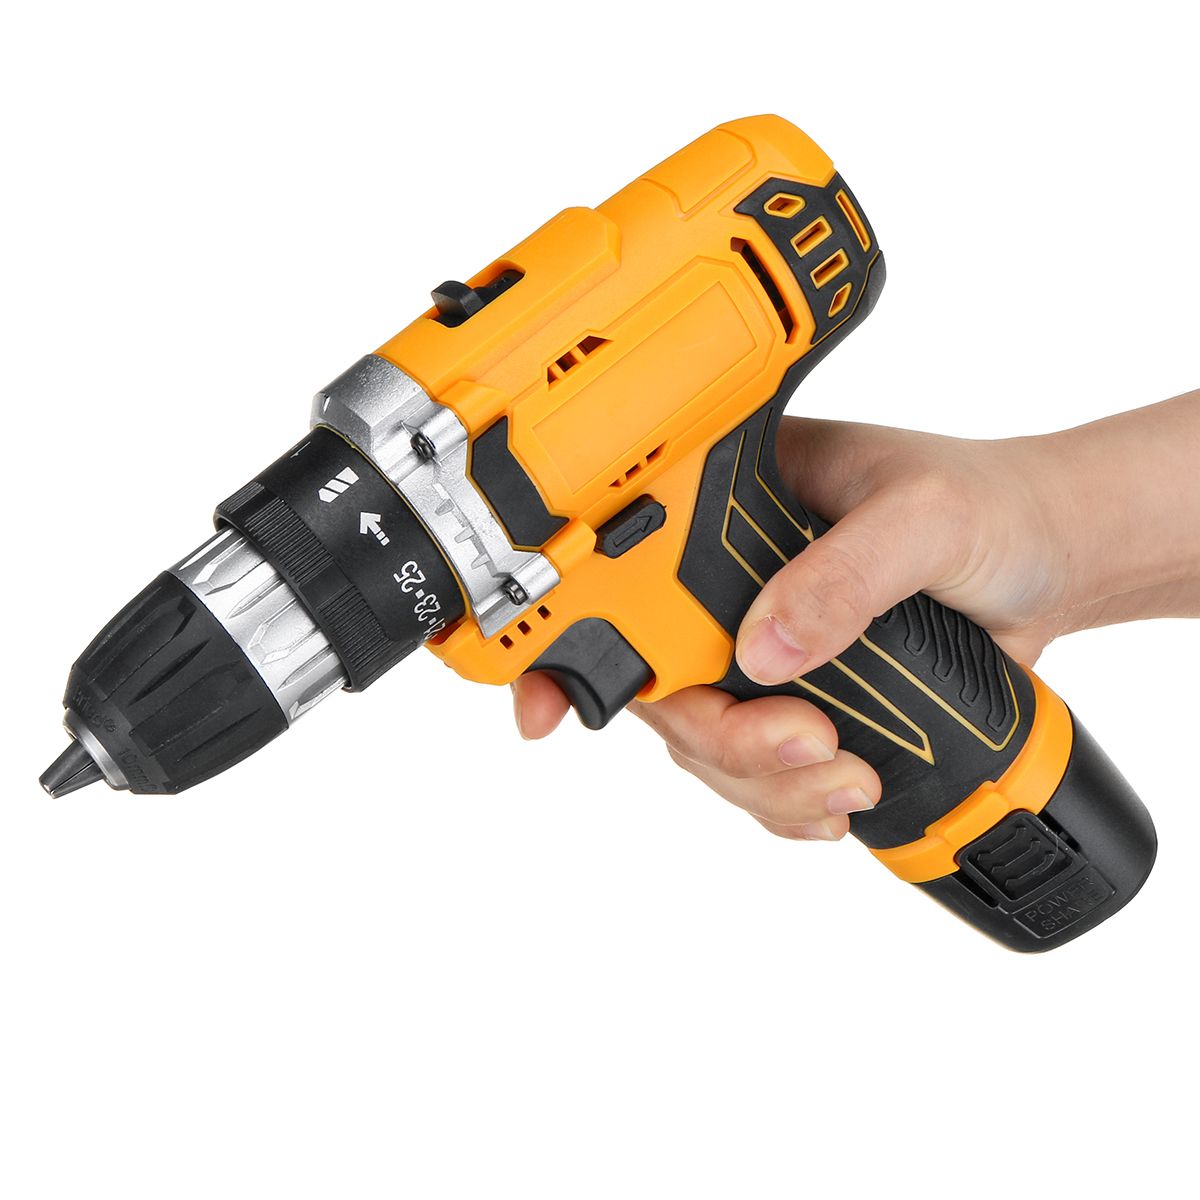 121821V-251-Torque-2-Speed-Cordless-Electric-Drill-Screwdriver-W-LED-Light-1733758